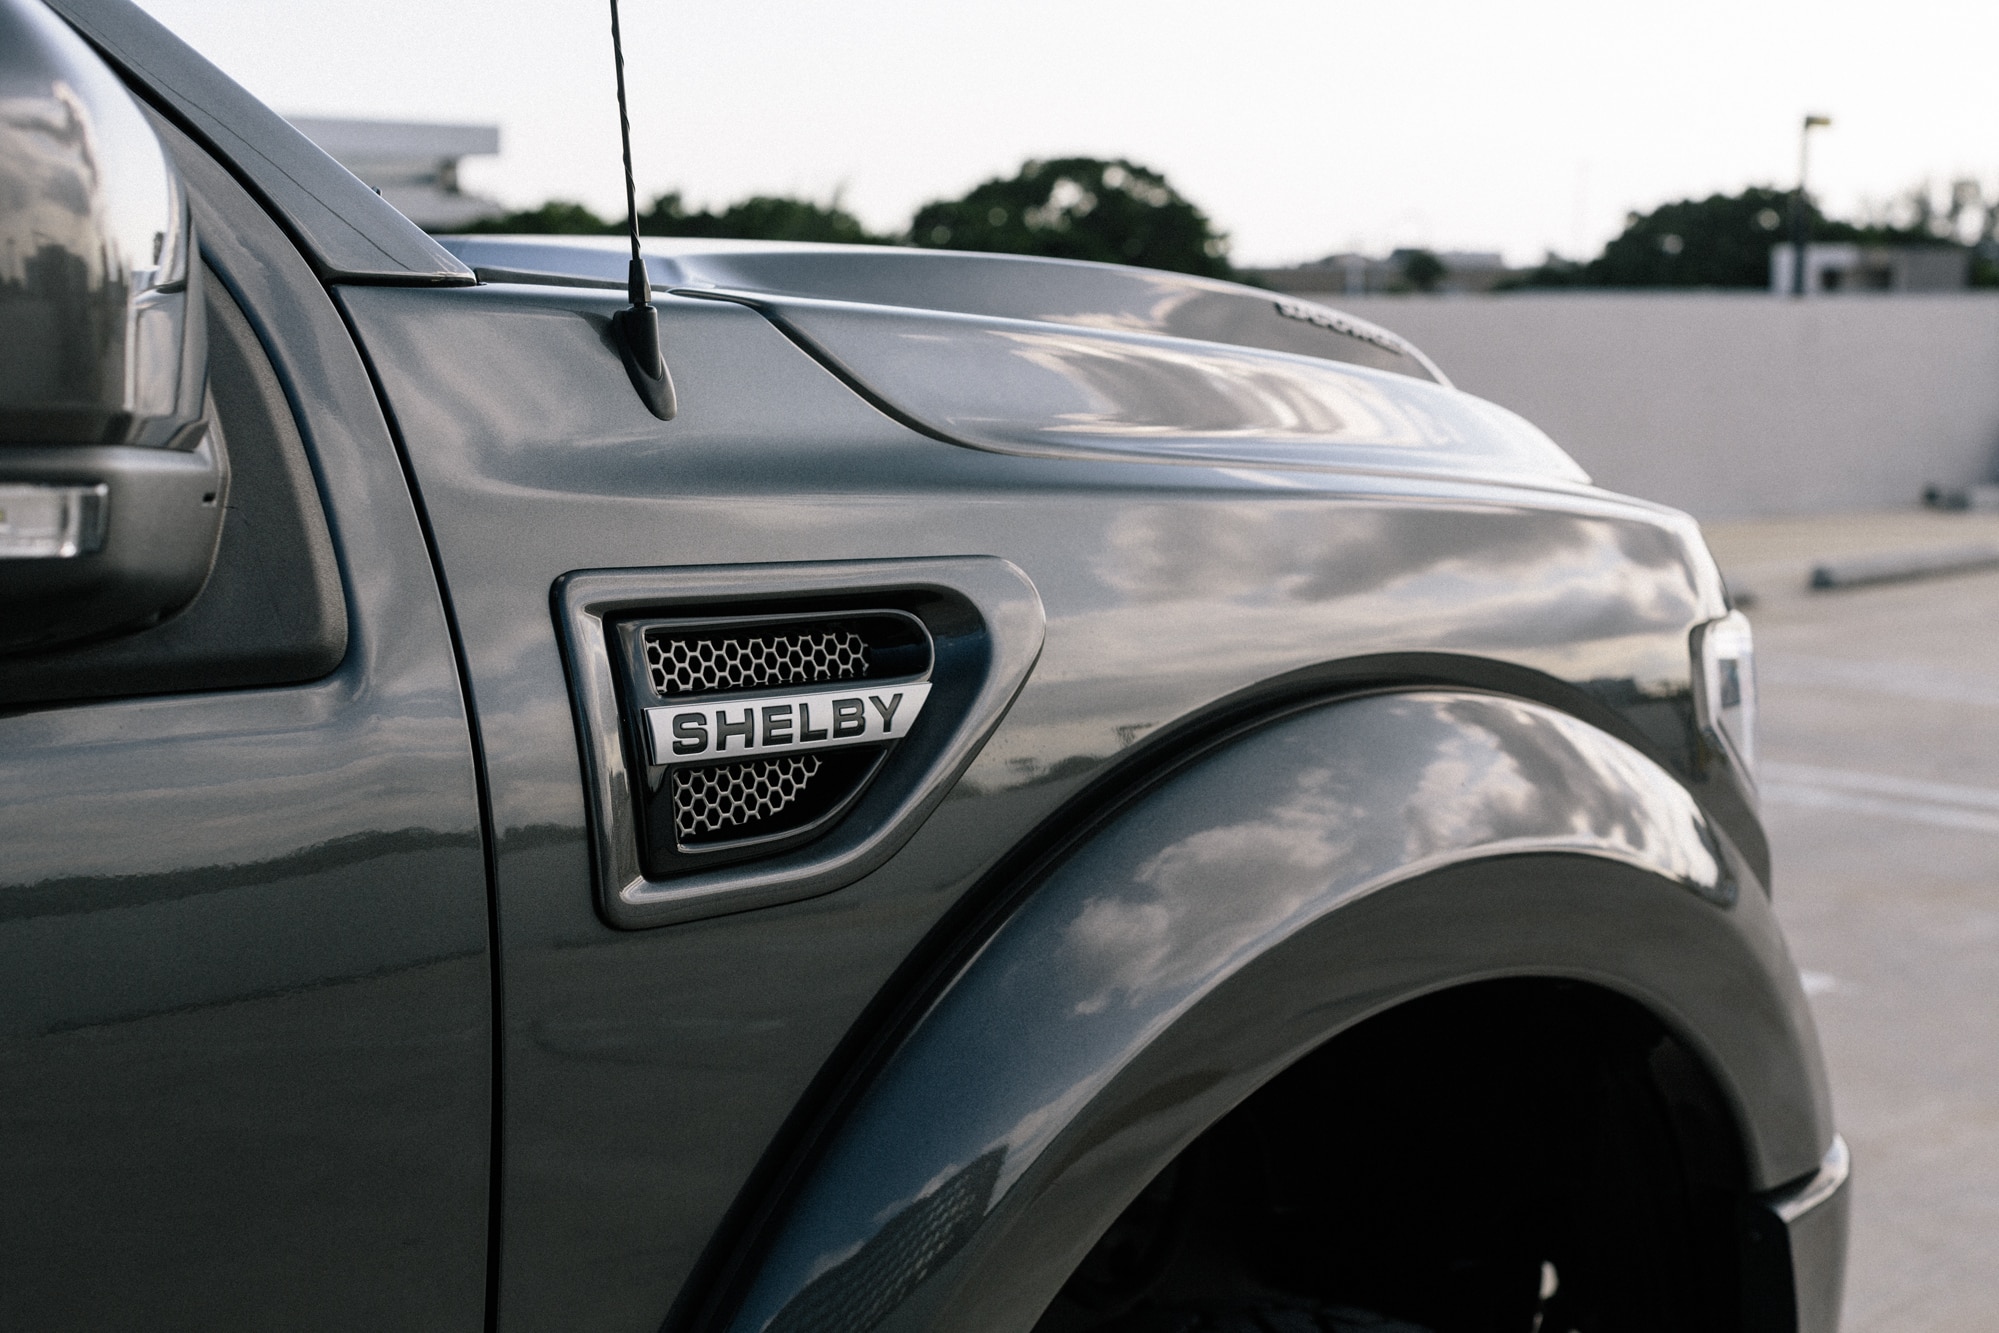 2019 Shelby F-150 Lariat (13th Gen) OPTIONAL Whipple Supercharged | 775 HP | #73 of 500 | Magnetic Grey | Shelby FOX-BDS Suspension | Falken Wildpeak A/T | Fully Loaded